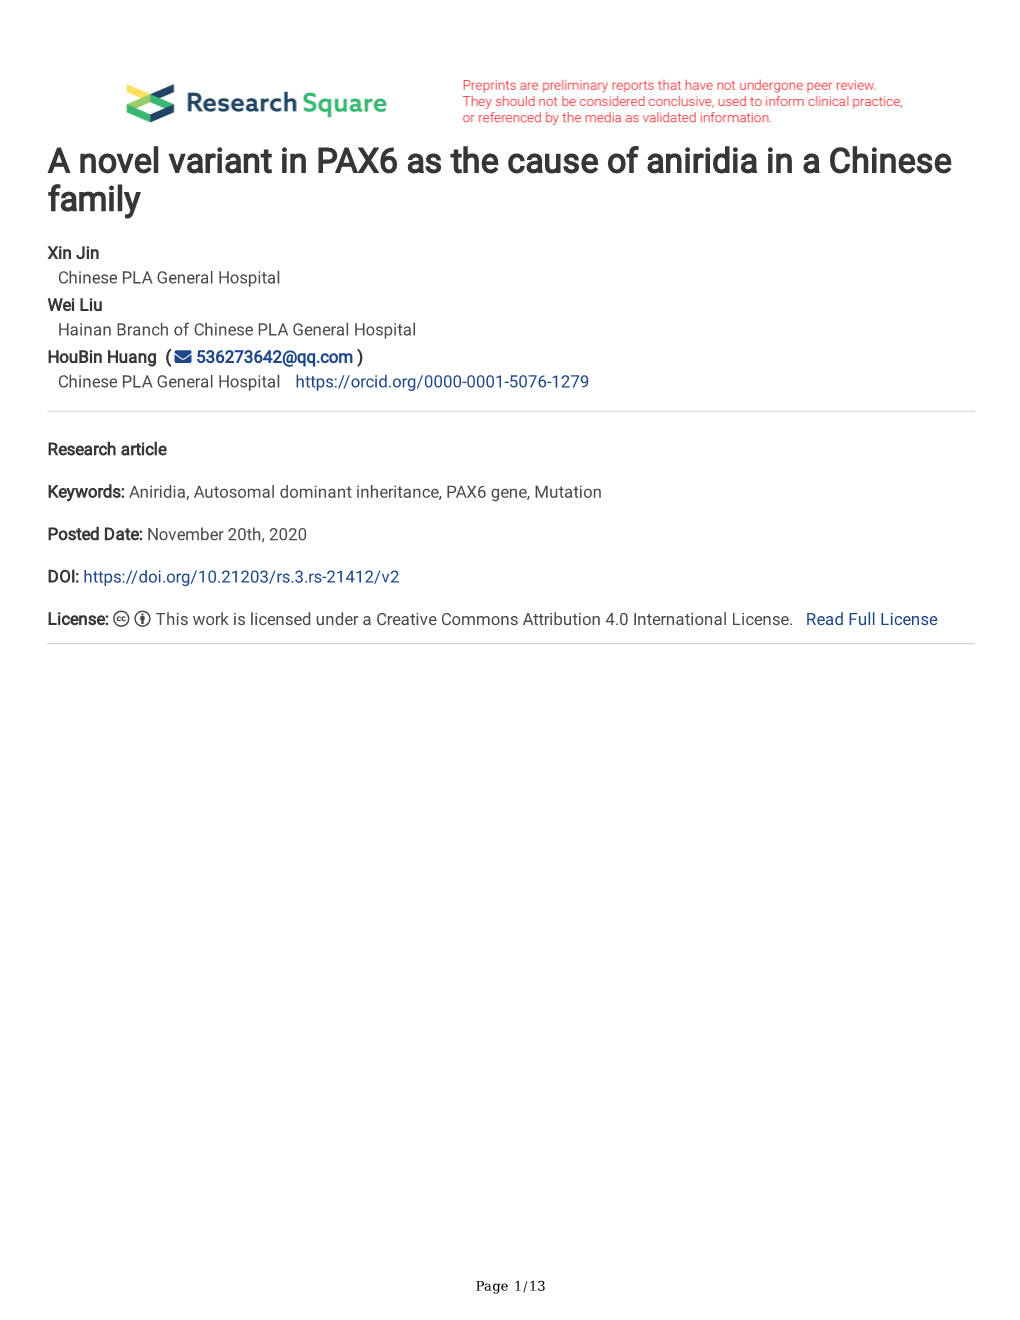 A Novel Variant in PAX6 As the Cause of Aniridia in a Chinese Family